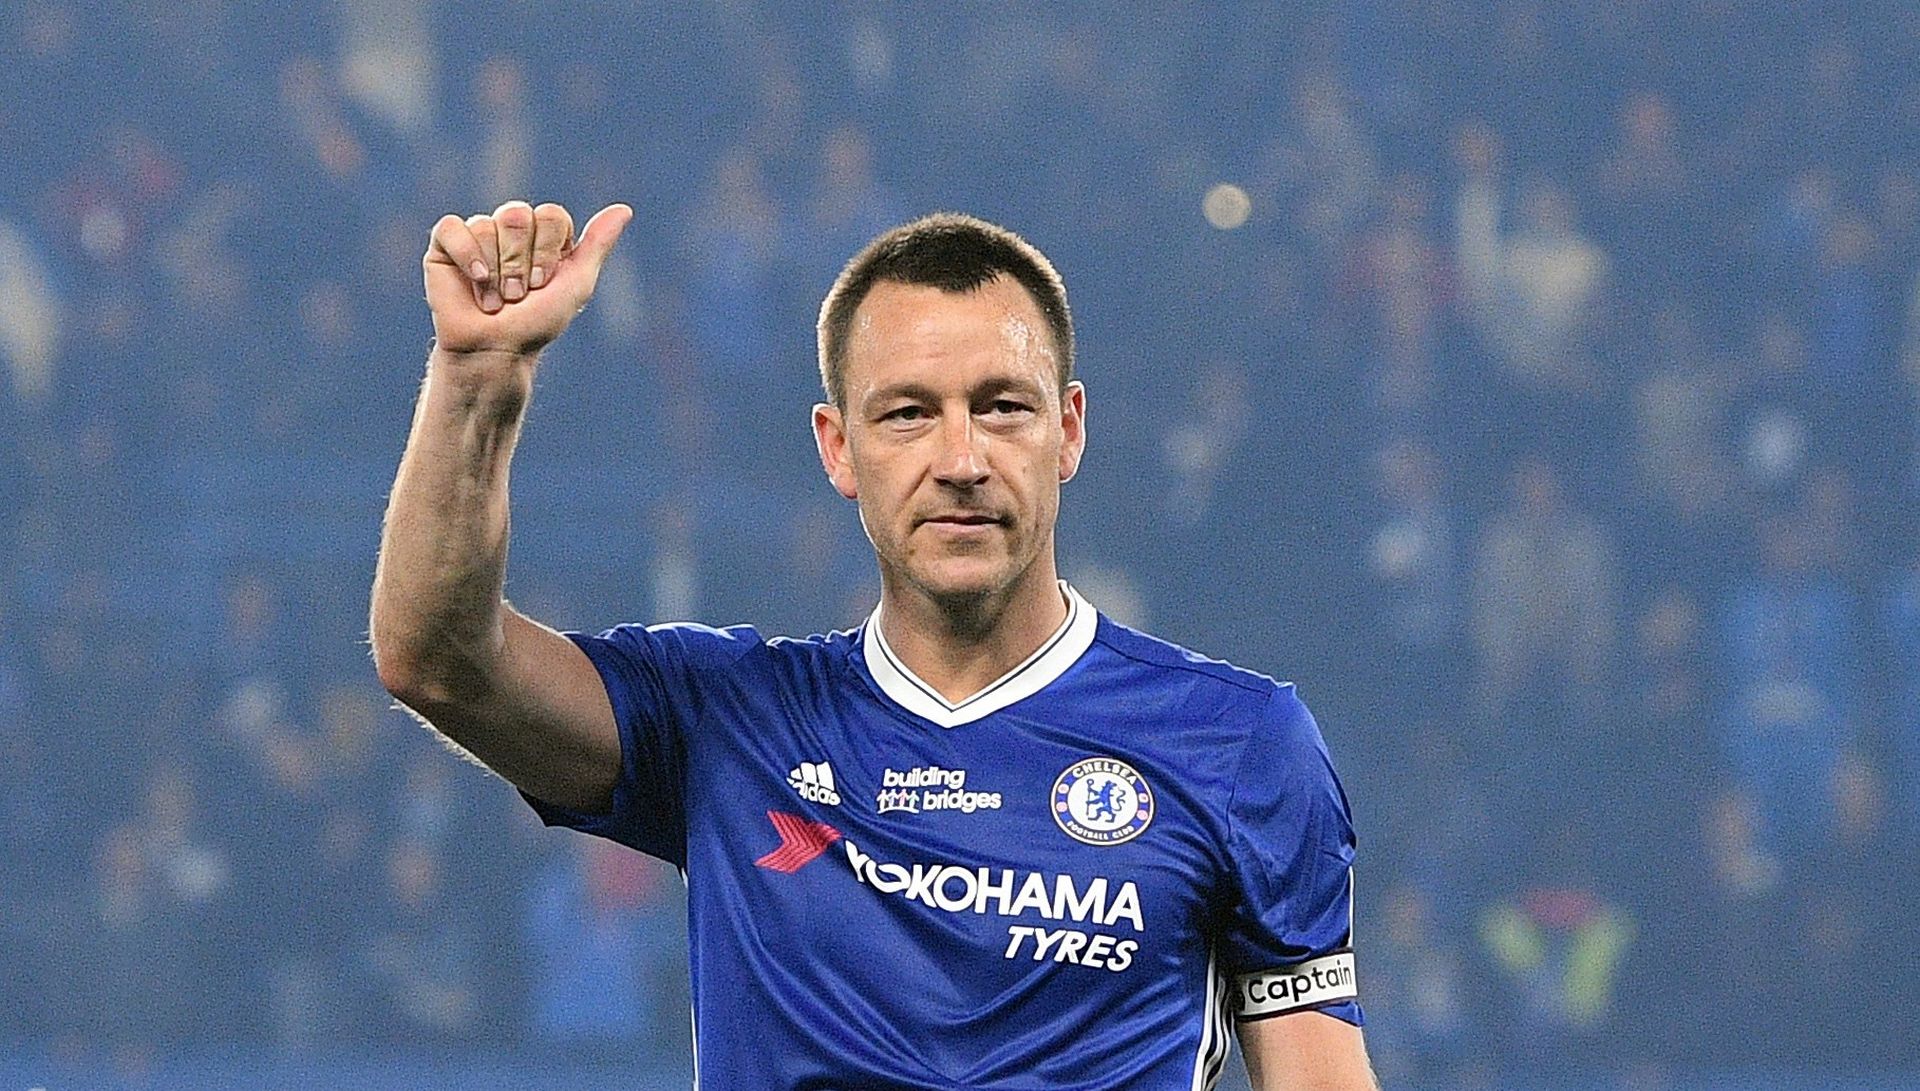 epa05966853 Chelsea John Terry celebrates after the English Premier league game between Chelsea and Watford at Stamford Bridge stadium in London, Britain, 15 May 2017.  EPA/FACUNDO ARRIZABALAGA EDITORIAL USE ONLY. No use with unauthorized audio, video, data, fixture lists, club/league logos or 'live' services. Online in-match use limited to 75 images, no video emulation. No use in betting, games or single club/league/player publications